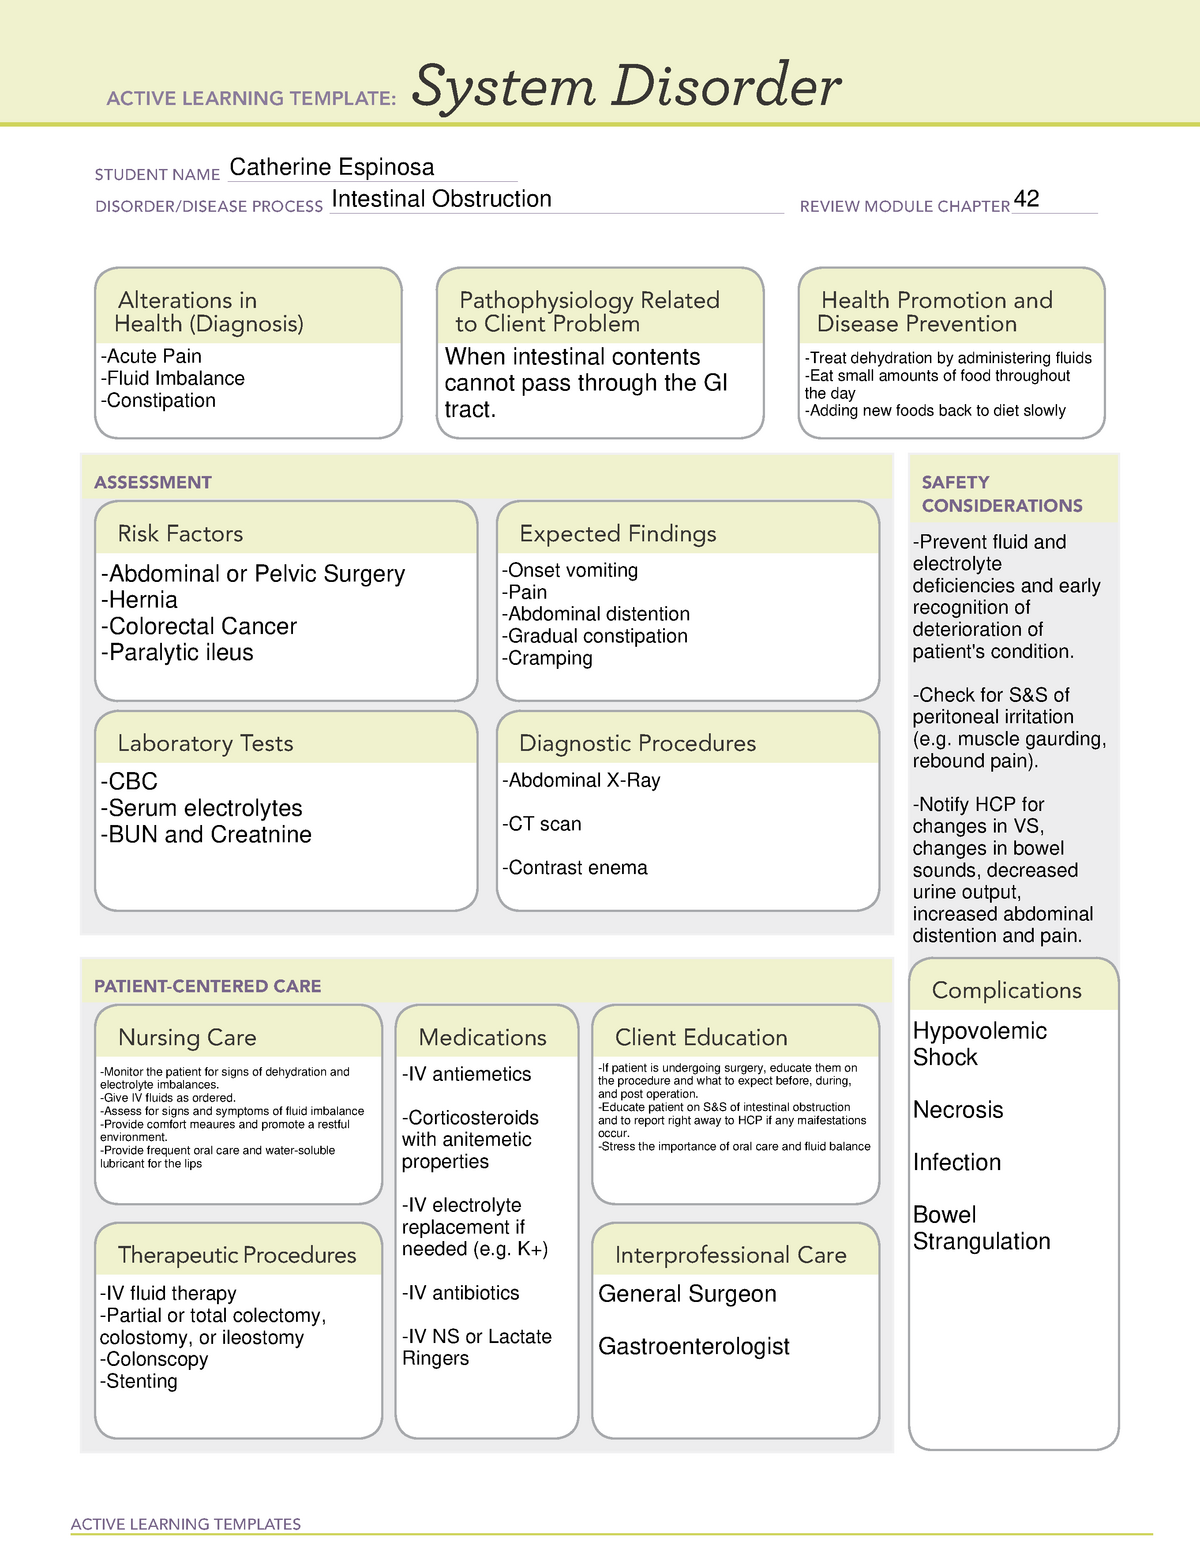 Intestinal Obstruction System Disorder ACTIVE LEARNING TEMPLATES